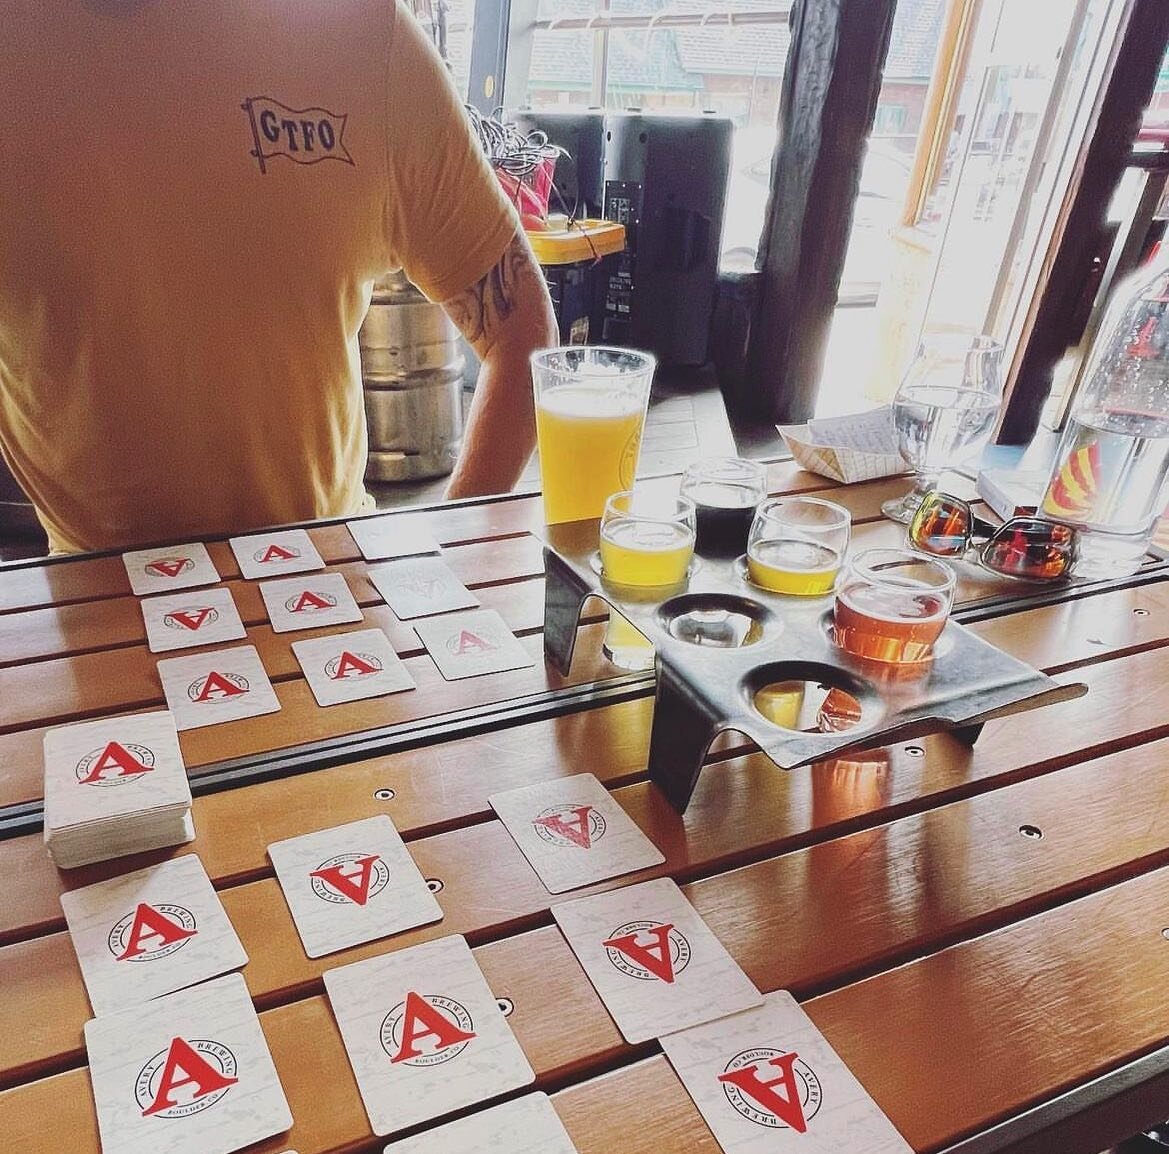 A flight and a deck of cards is the perfect way to spend an afternoon. Thanks @ourvanlifetails for stopping by!